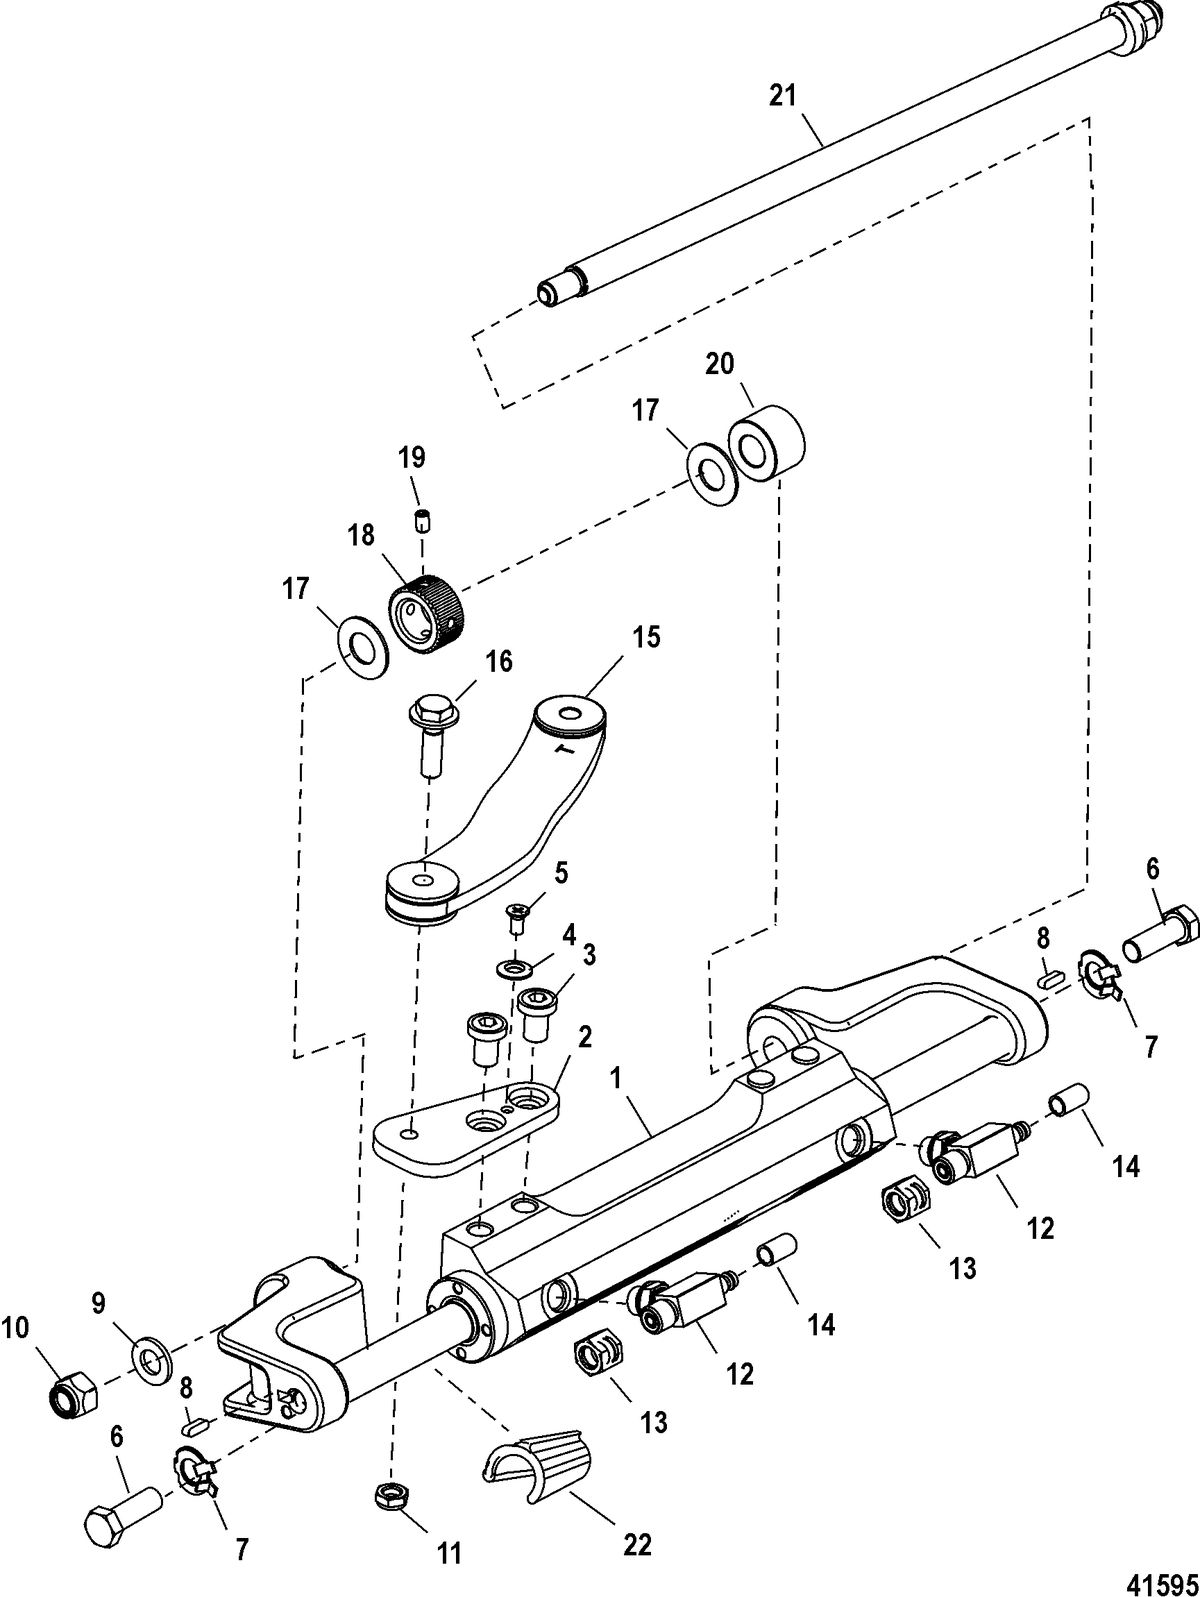 ACCESSORIES STEERING SYSTEMS AND COMPONENTS Steering Actuator Assembly(898349A15)